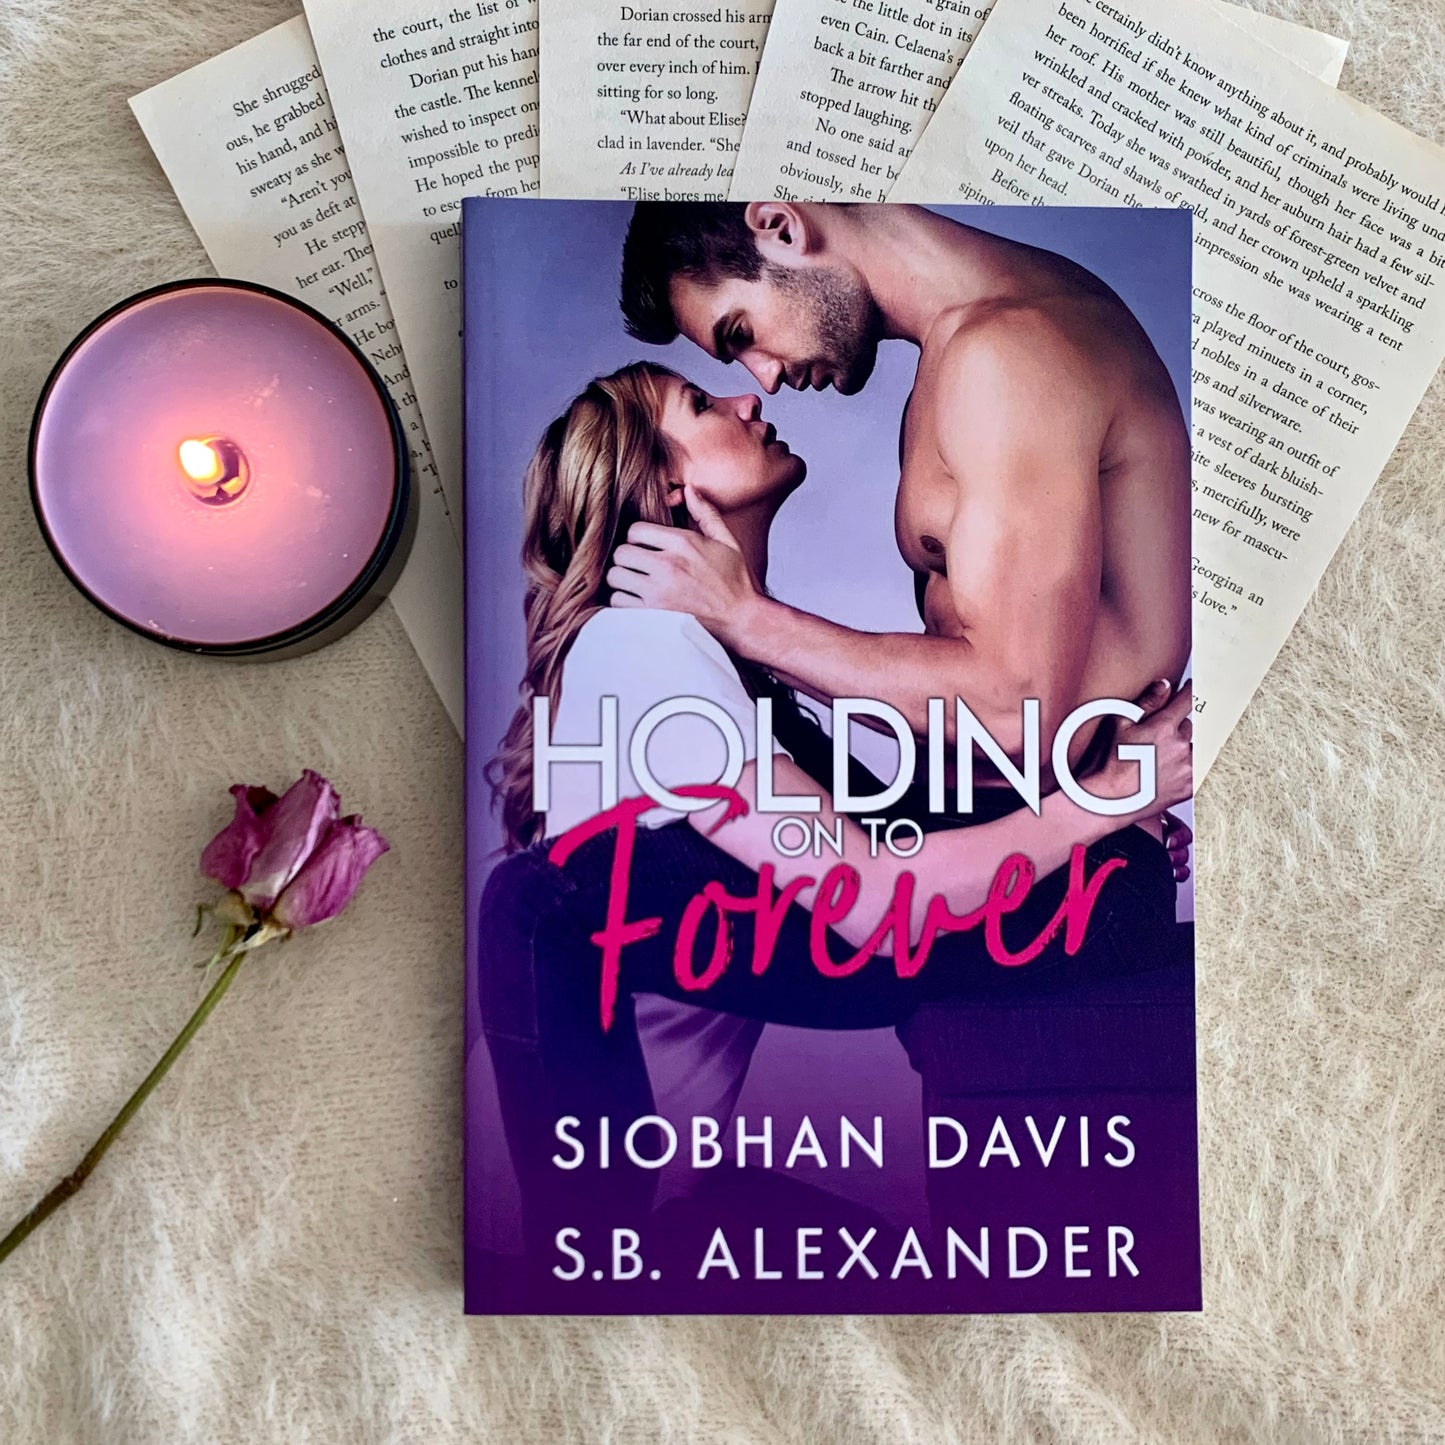 Holding on to Forever by Siobhan Davis and S.B. Alexander